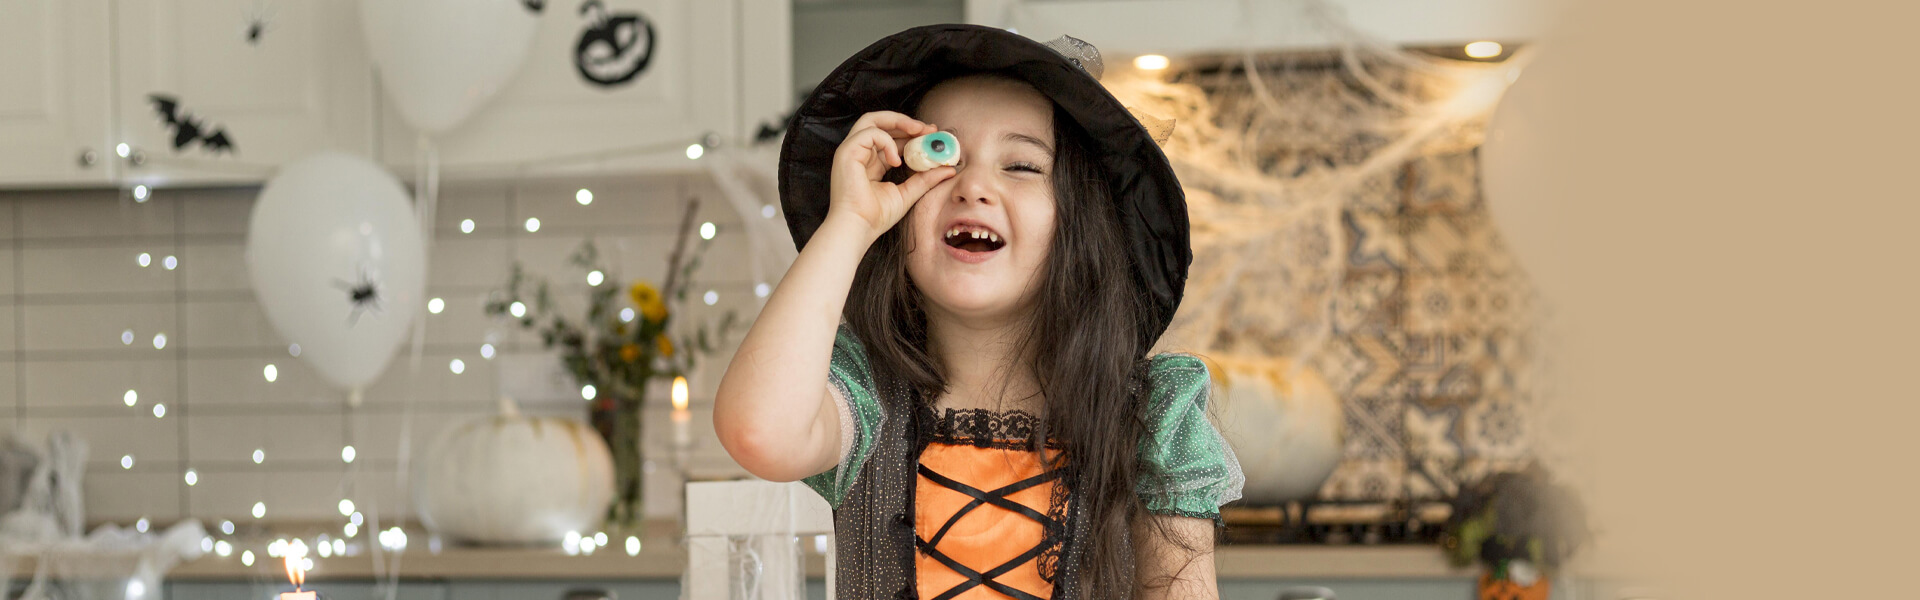 Dietary Tips to Preserve Your Oral Health This Halloween